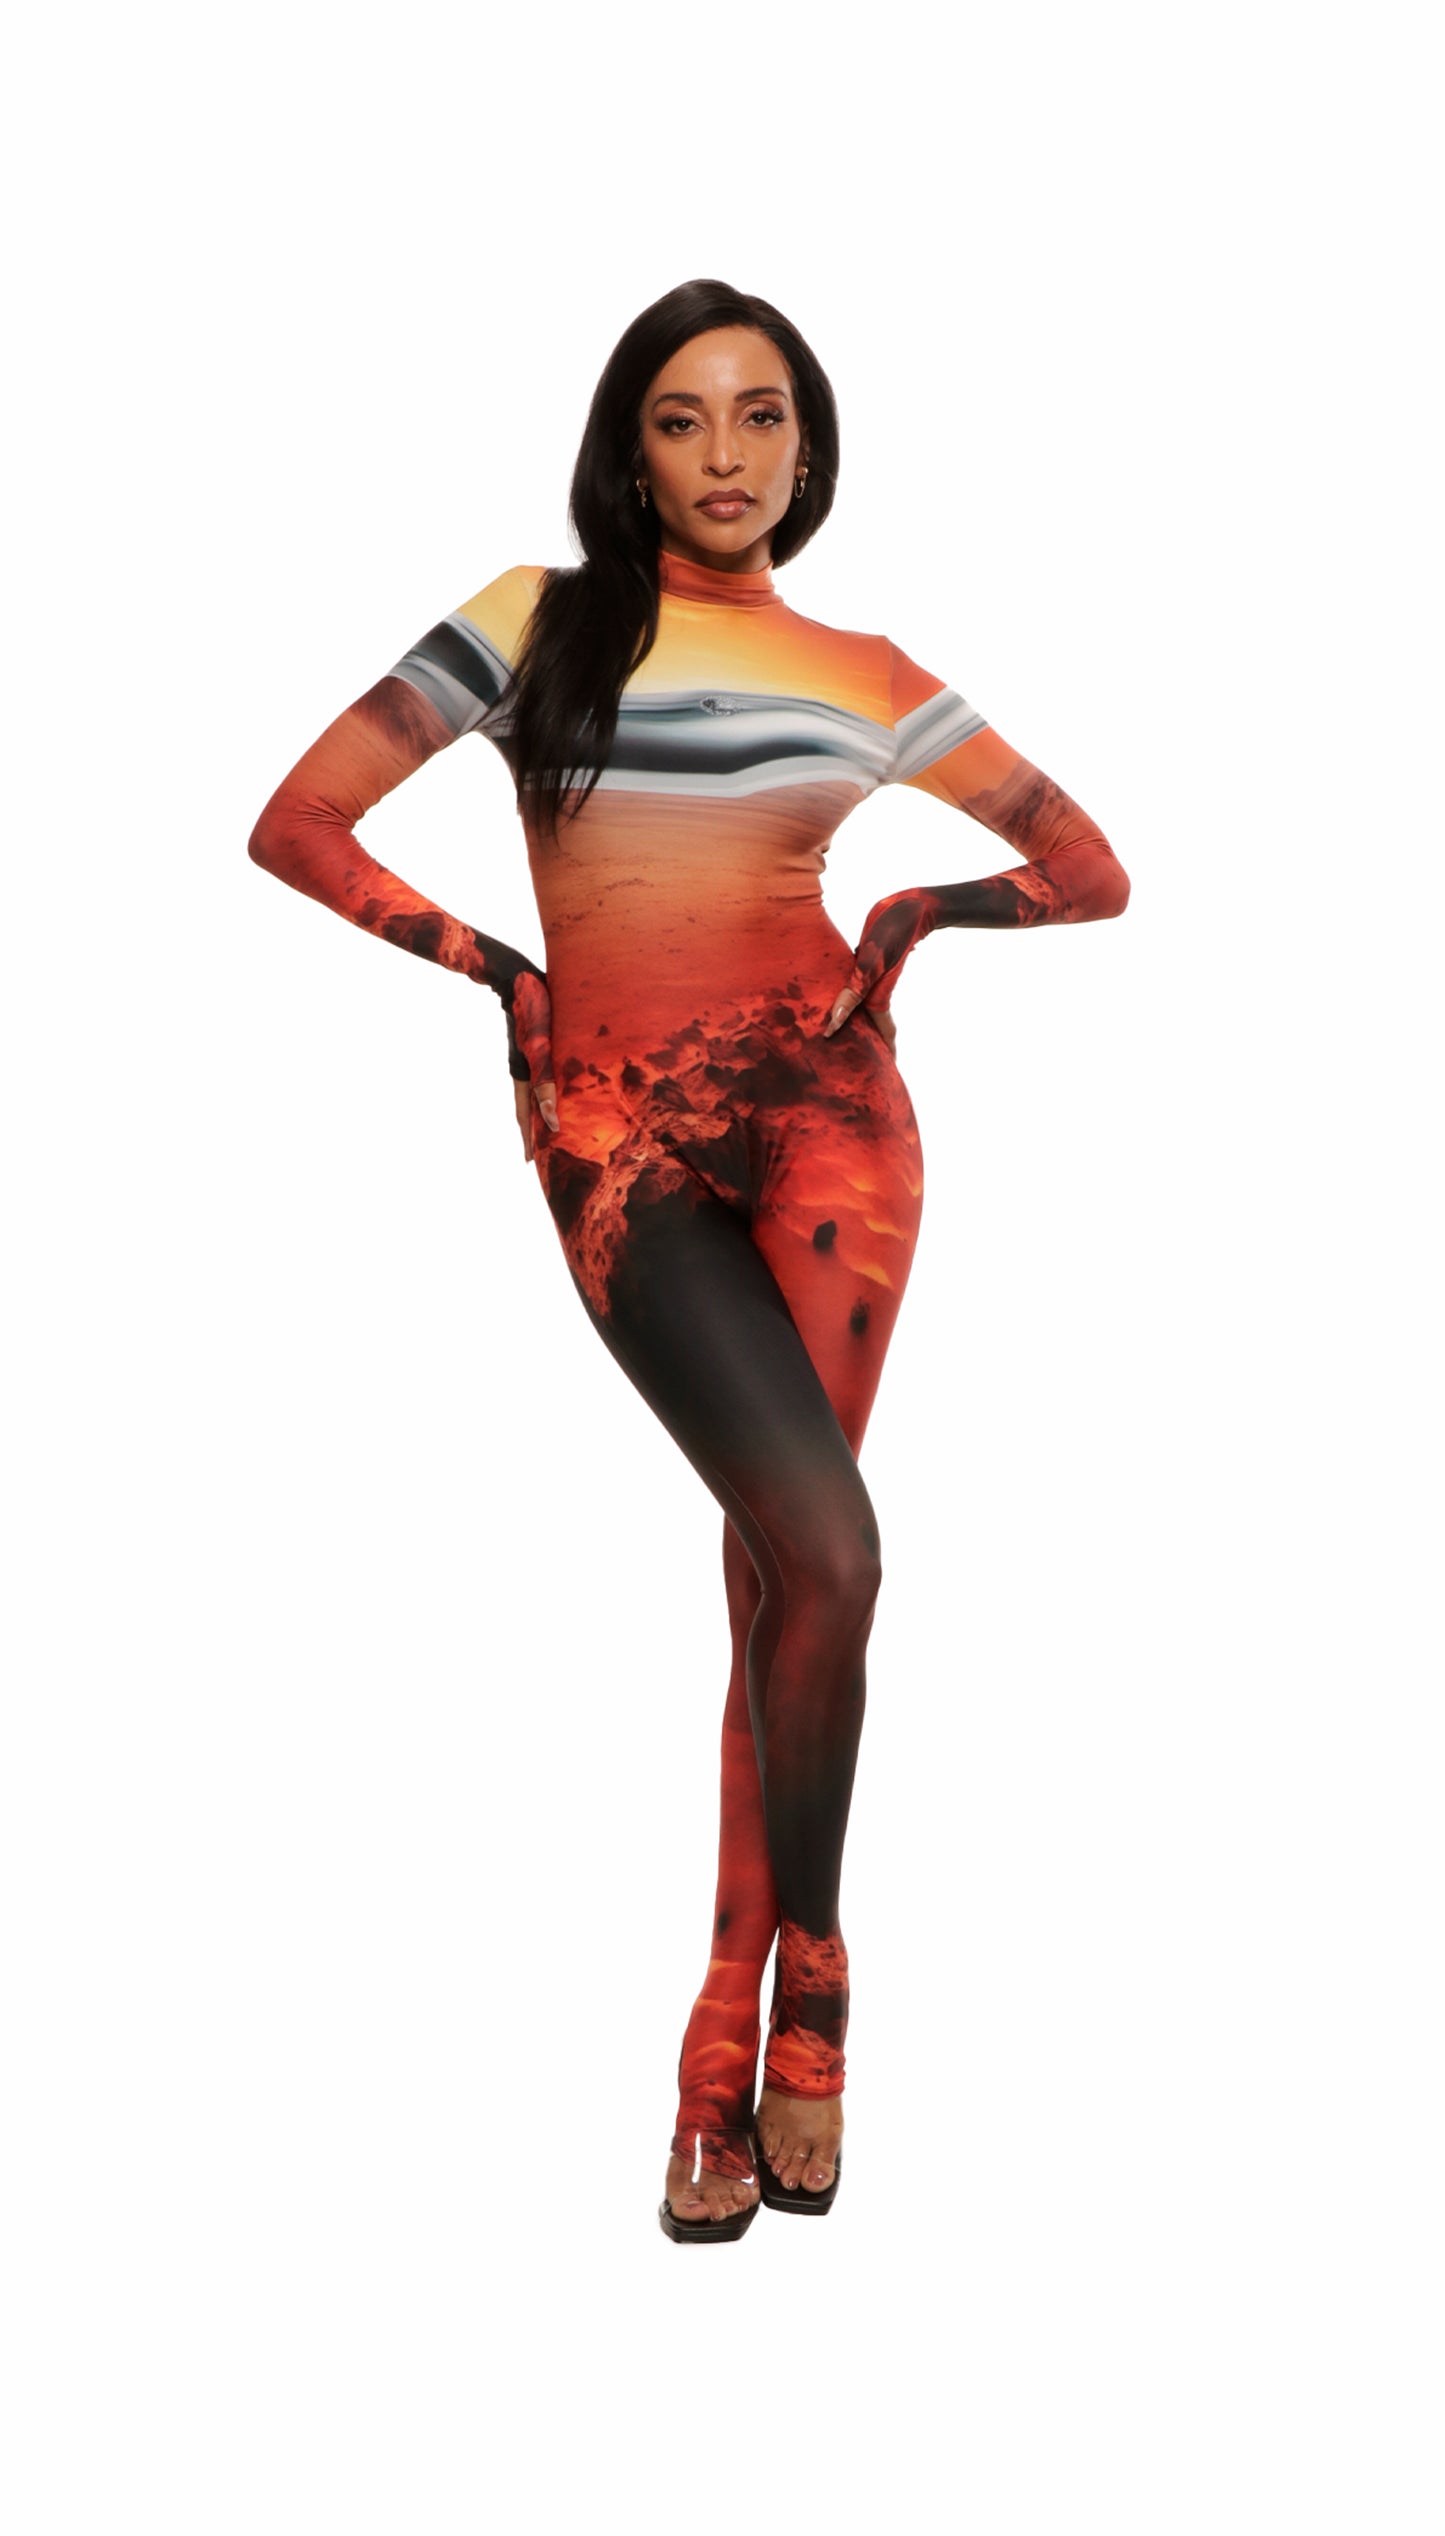 Woman wears Mars sunset print wetsuit or catsuit with chrome detail across chest and QR logo with heel cutout